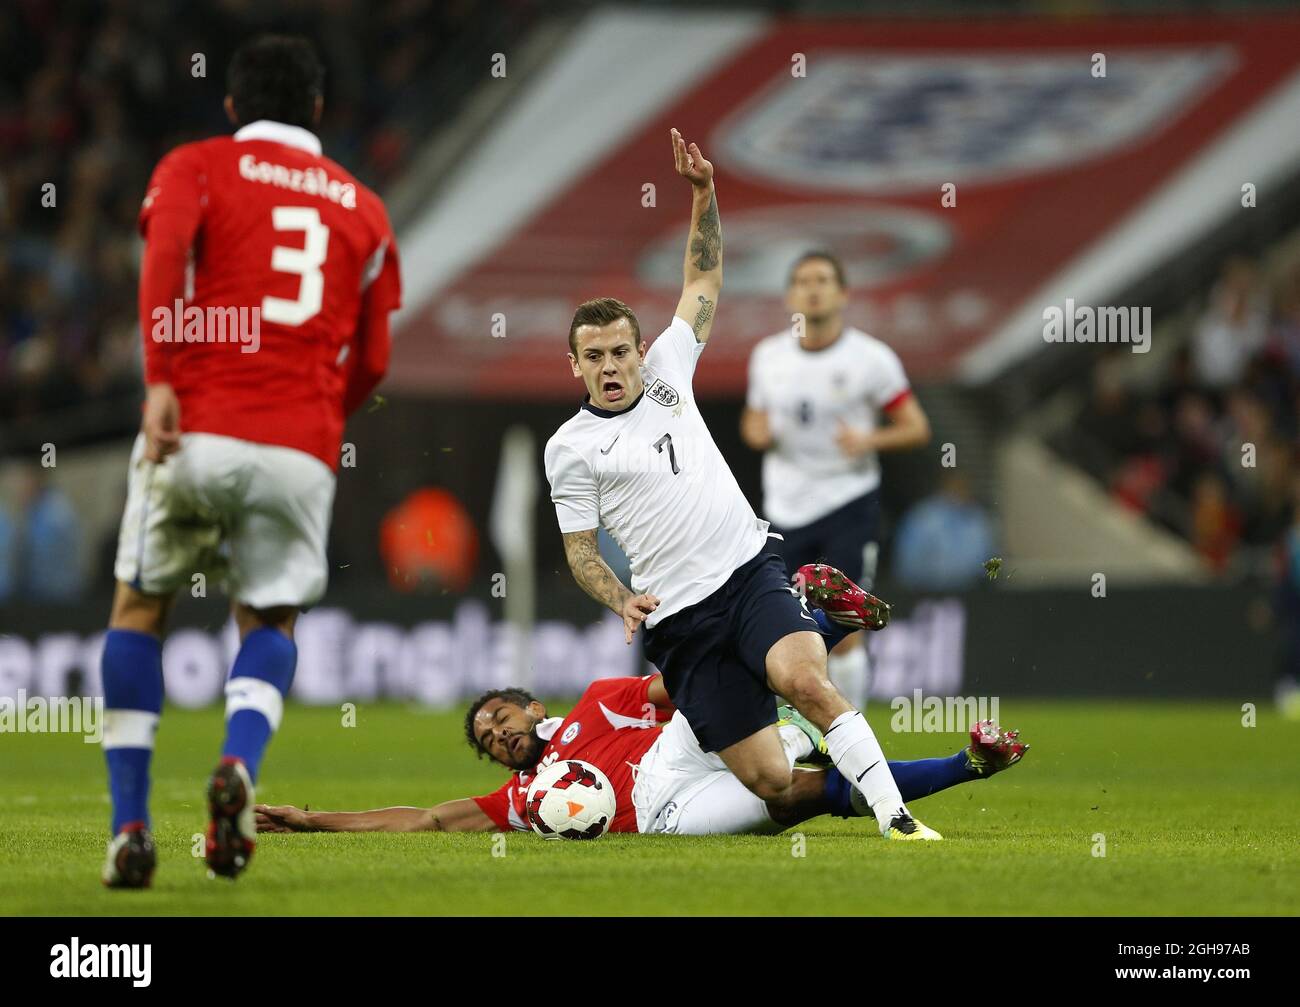 England's Jack Wilshere gets fouled by Chile's Jean Beausejour during the International Friendly match between England and Chile held at the Wembley Stadium in London, England on Nov. 15, 2013. Stock Photo